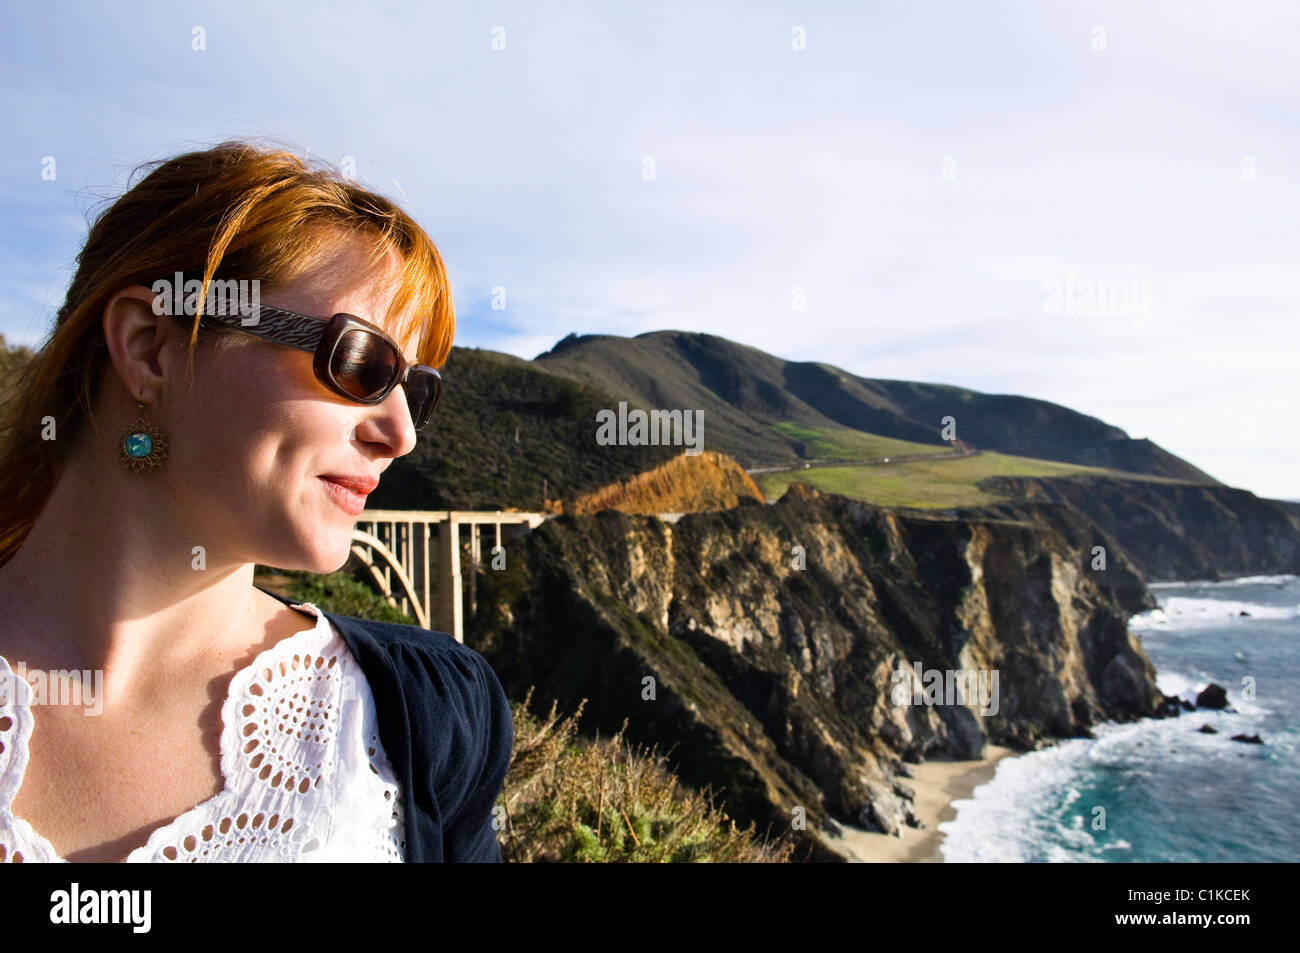 Woman Looking at View of Big Sur Coast and Santa Lucia Mountains, Monterey County, California, USA Stock Photo